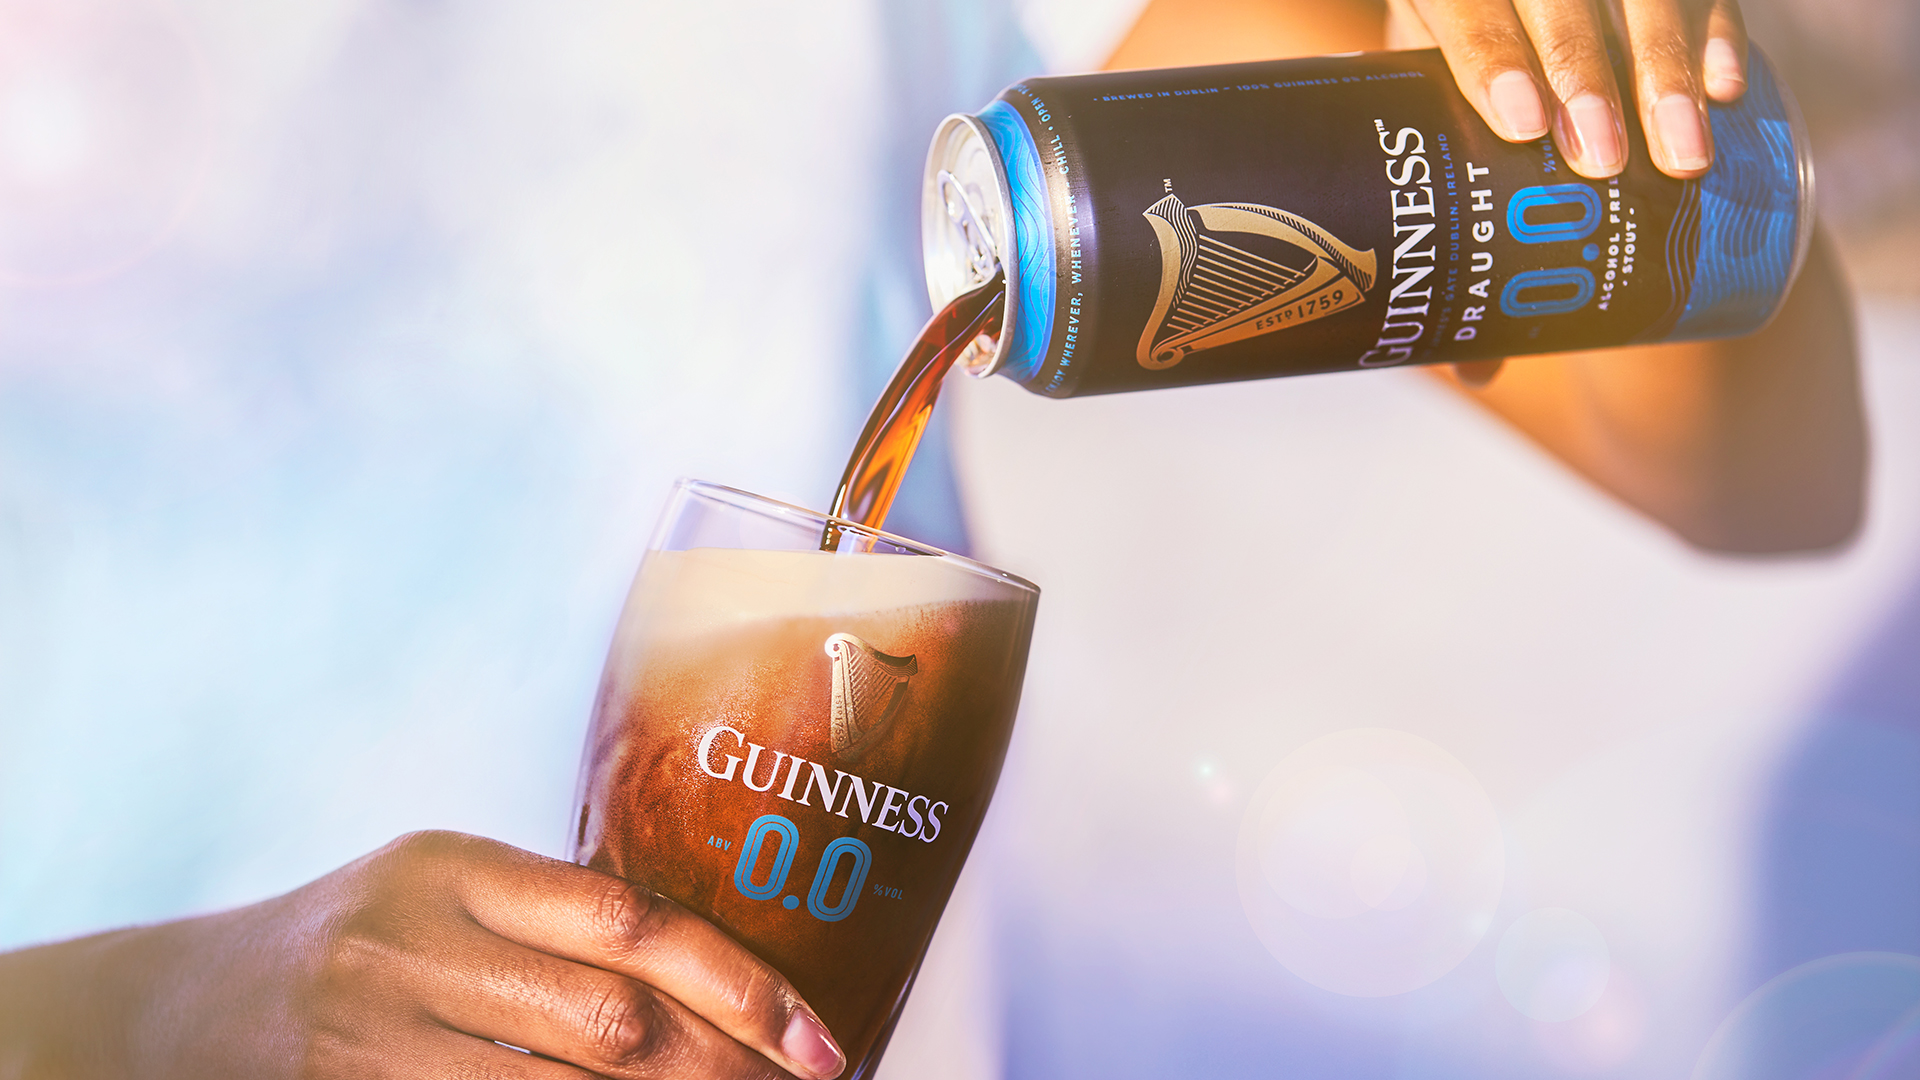 My goodness – Guinness goes alcohol free